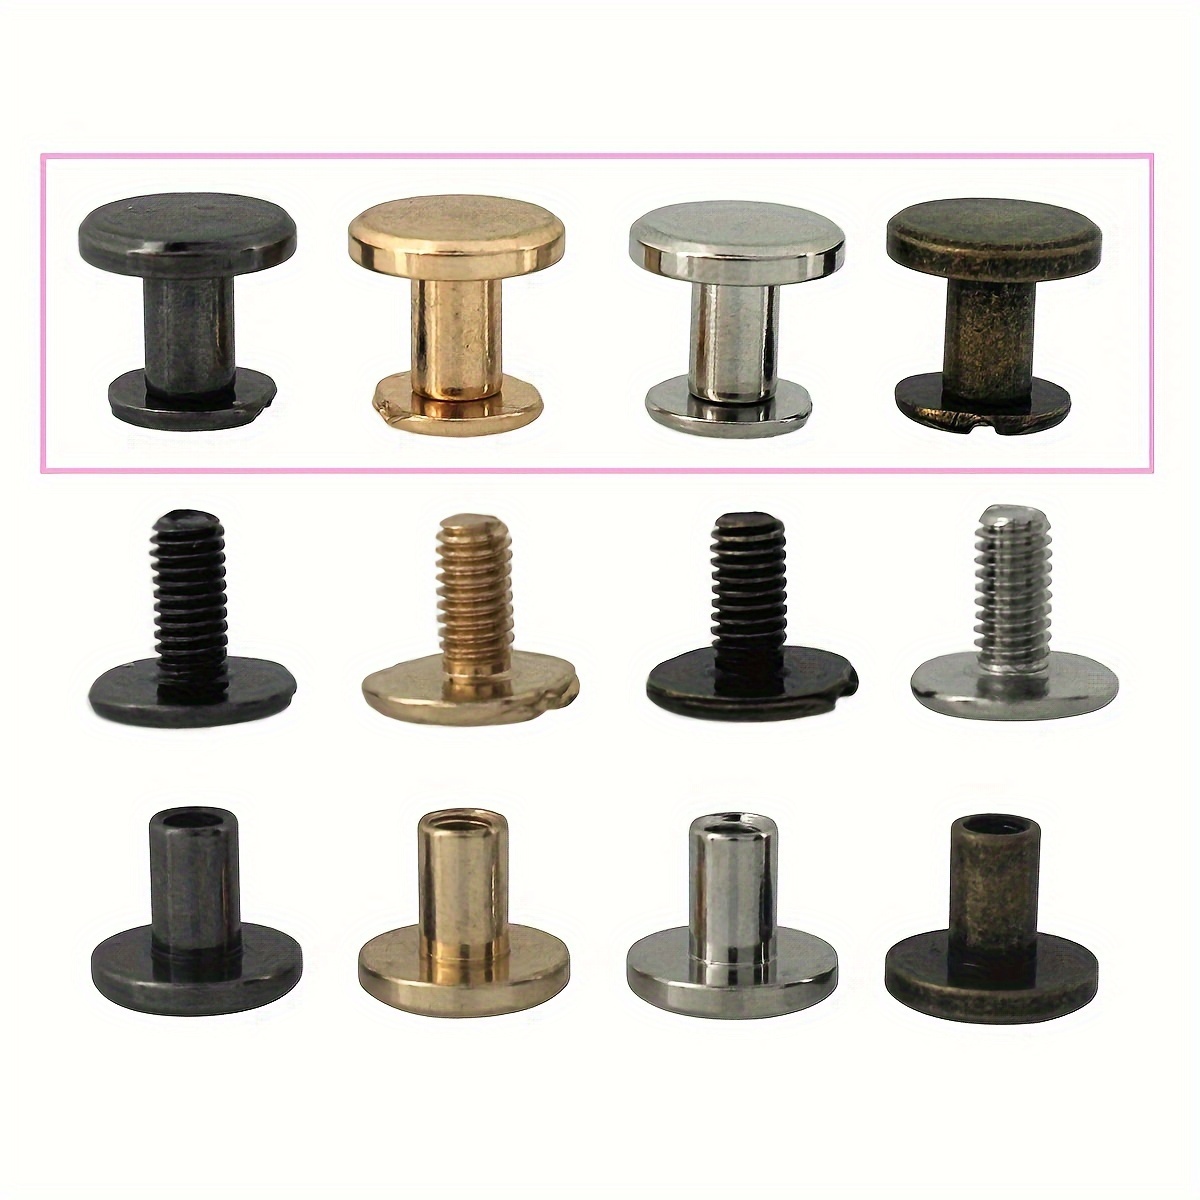 Guoxin 200 Sets Chicago Screws Round Flat Head Metal Nail Studs Rivets  Screwback Spots Belt Buckle Screws Buttons for DIY Leather Crafting with  Box